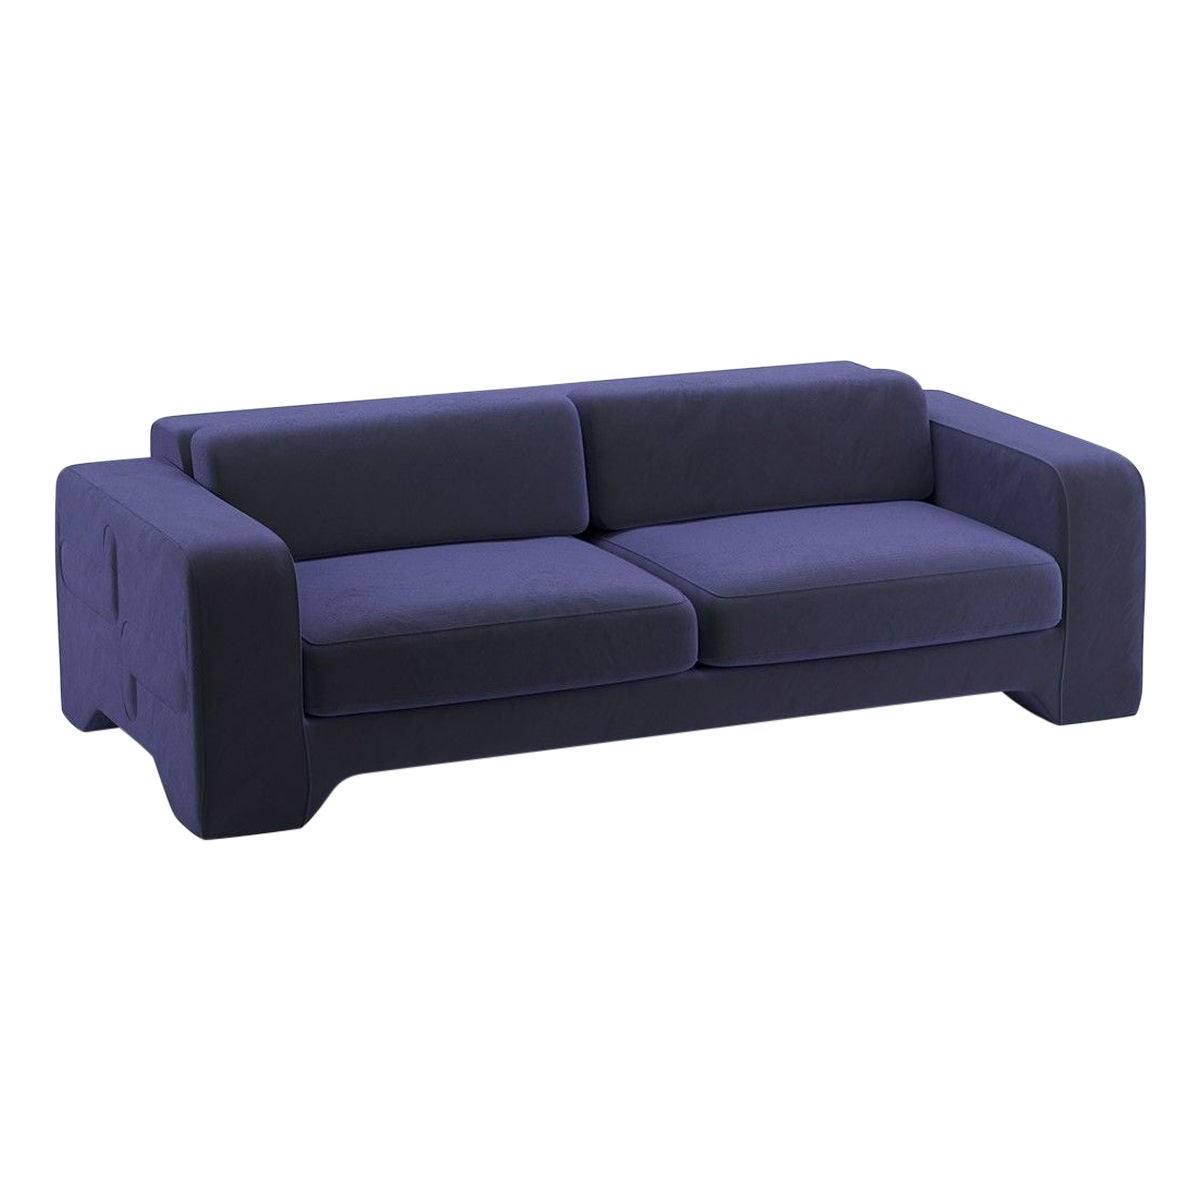 Popus Editions Giovanna 4 Seater Sofa in Marine Navy Como Velvet Upholstery For Sale